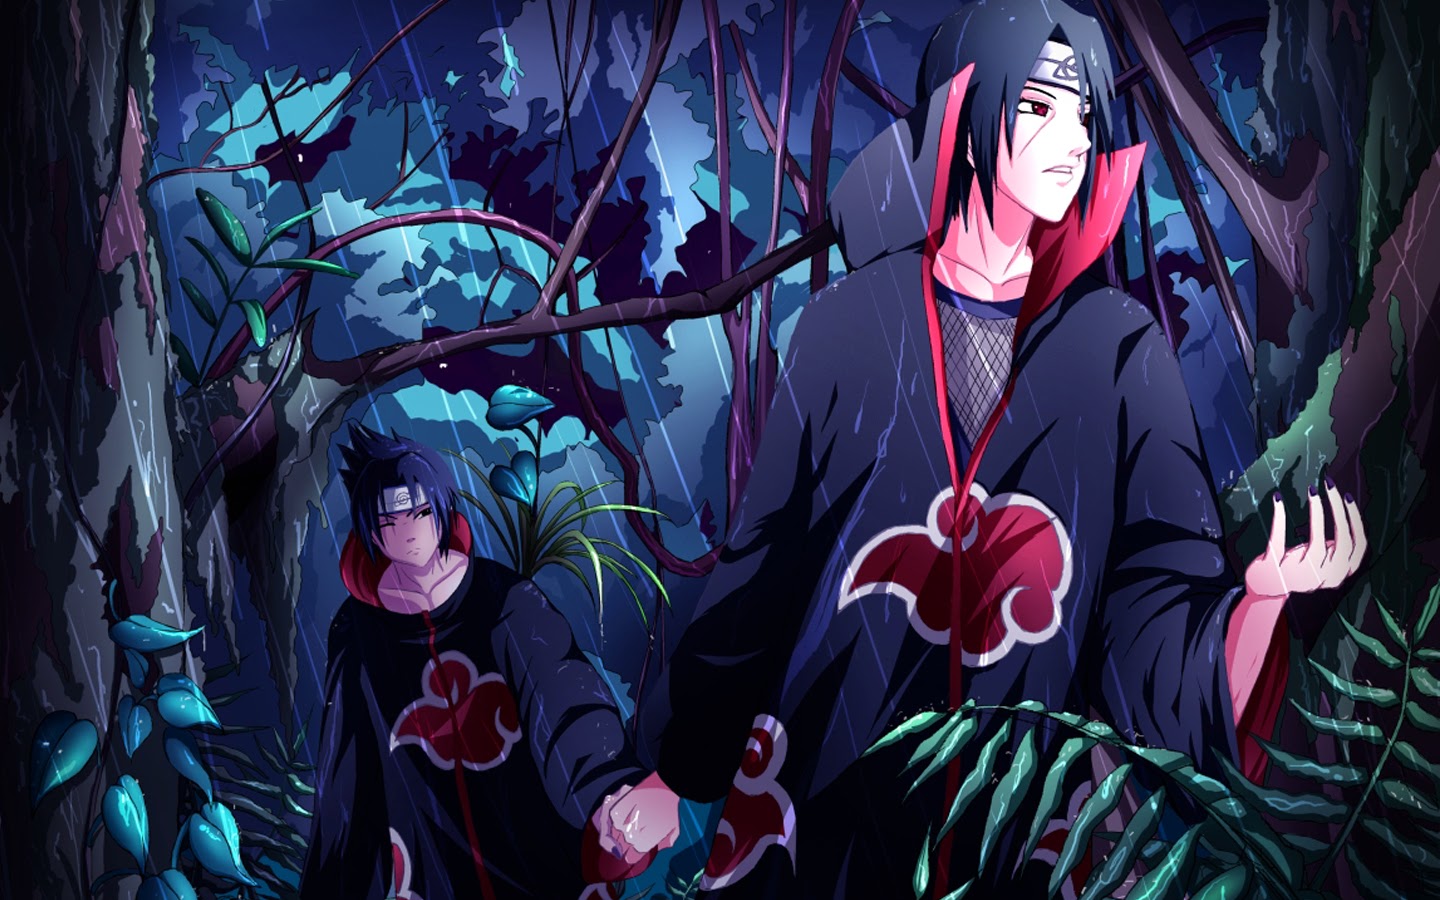 Itachi Wallpaper Hd : 48+ Itachi Wallpapers HD on WallpaperSafari : See more naruto itachi wallpaper, itachi wallpaper, sasuke itachi wallpapers, itachi uchiha looking for the best itachi wallpaper?